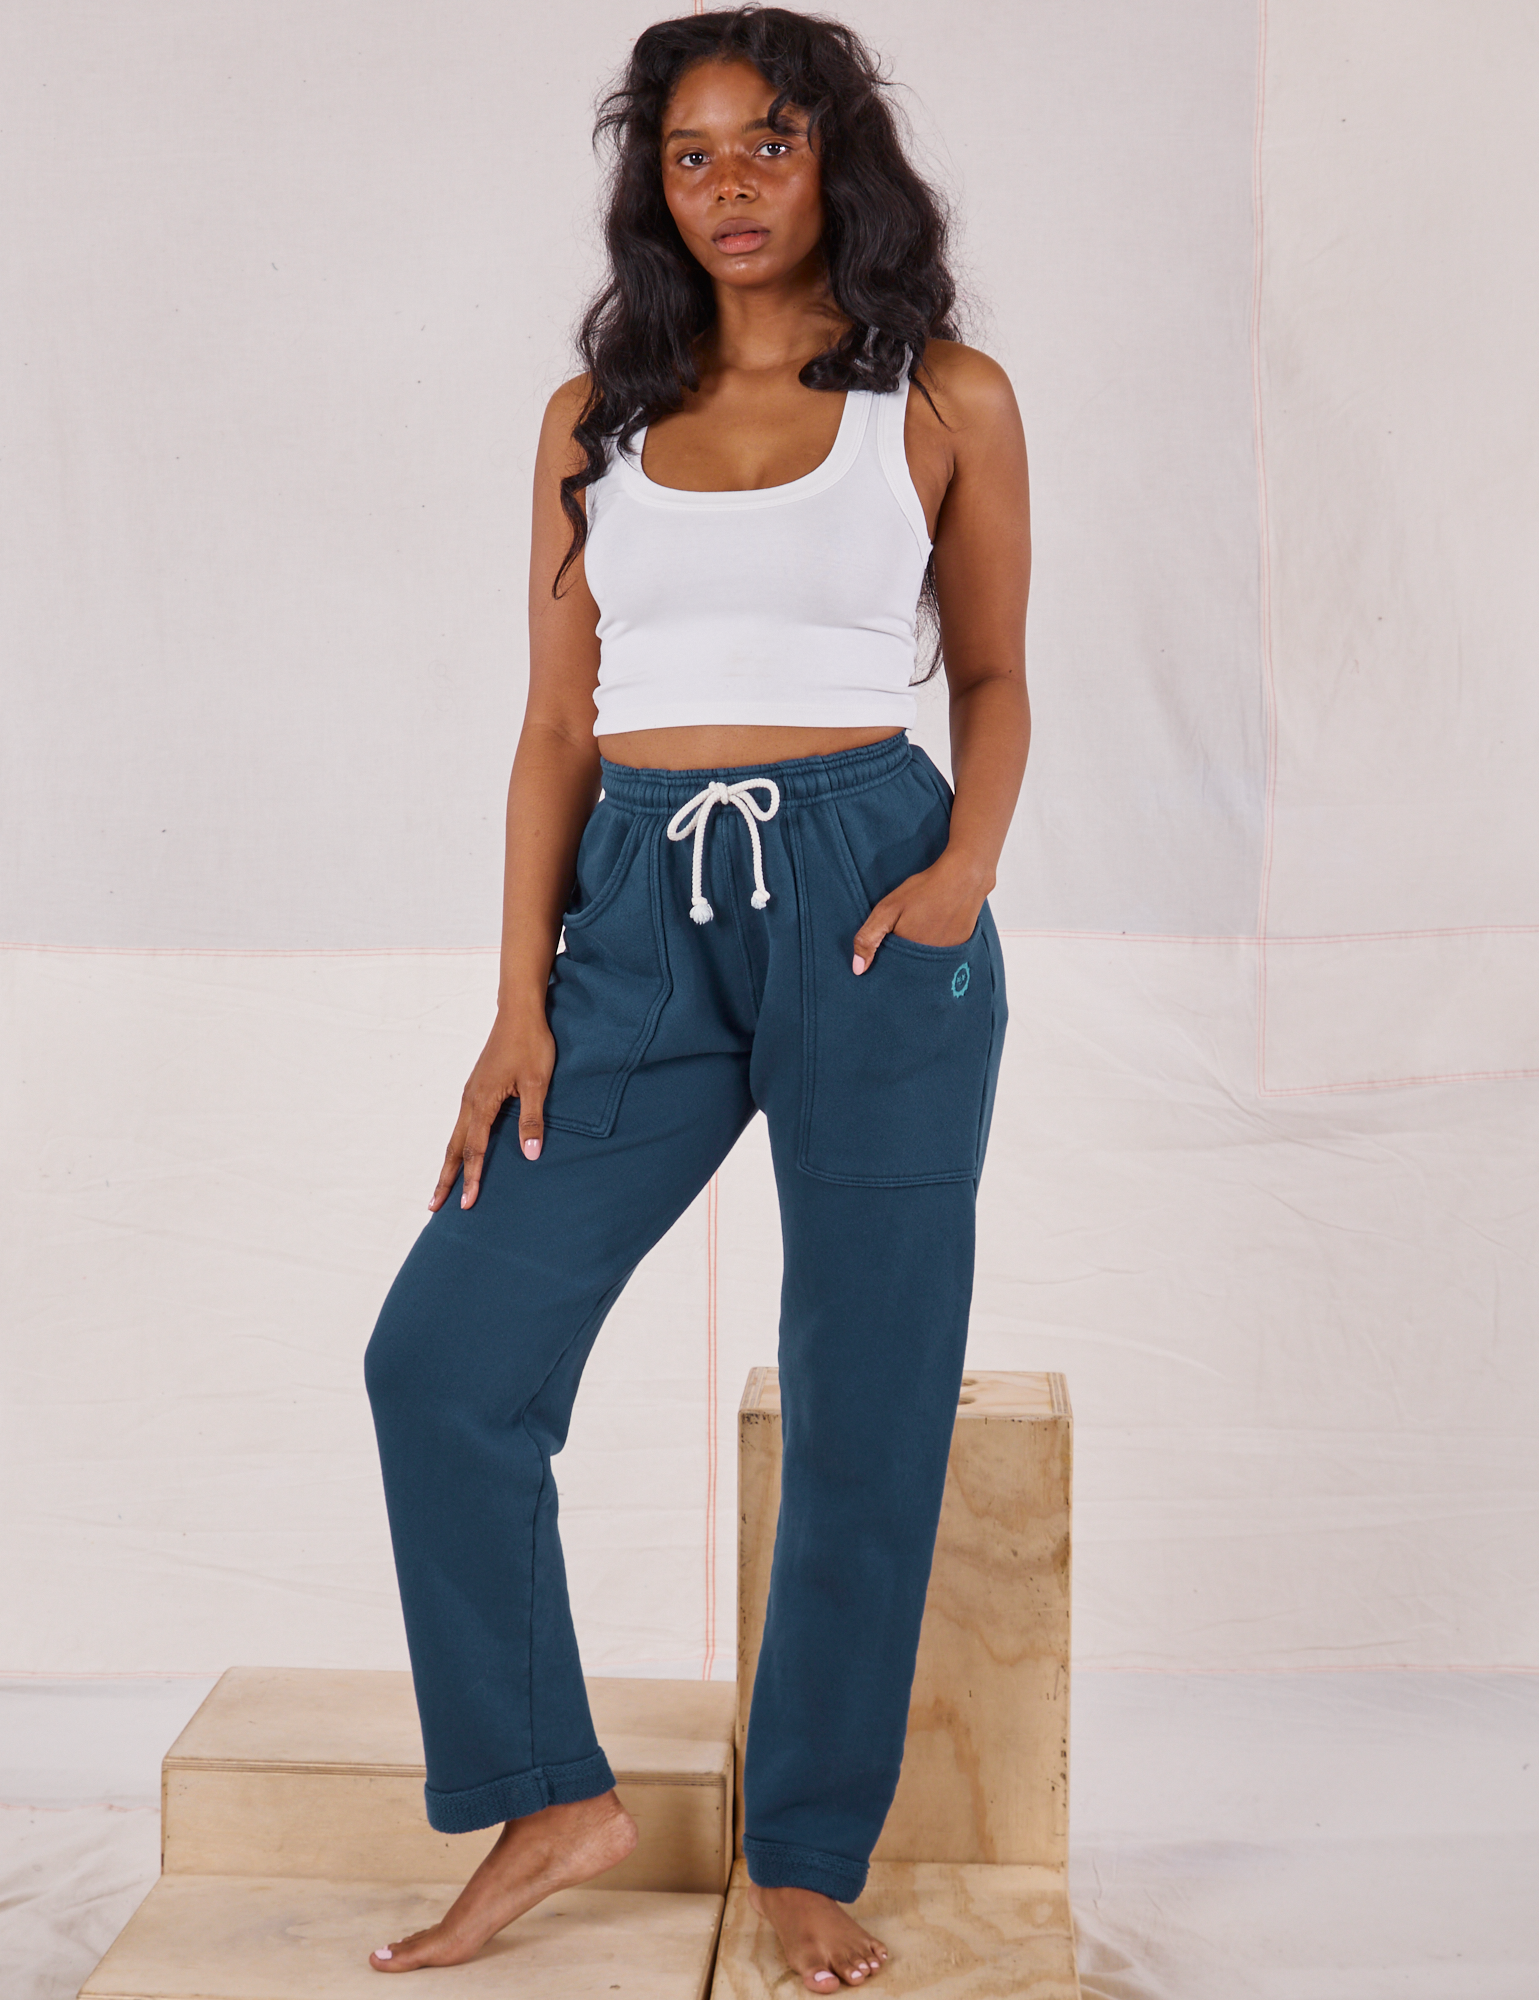 Kandia is 5&#39;3&quot; and wearing P Rolled Cuff Sweat Pants in Lagoon and vintage off-white Cropped Tank Top